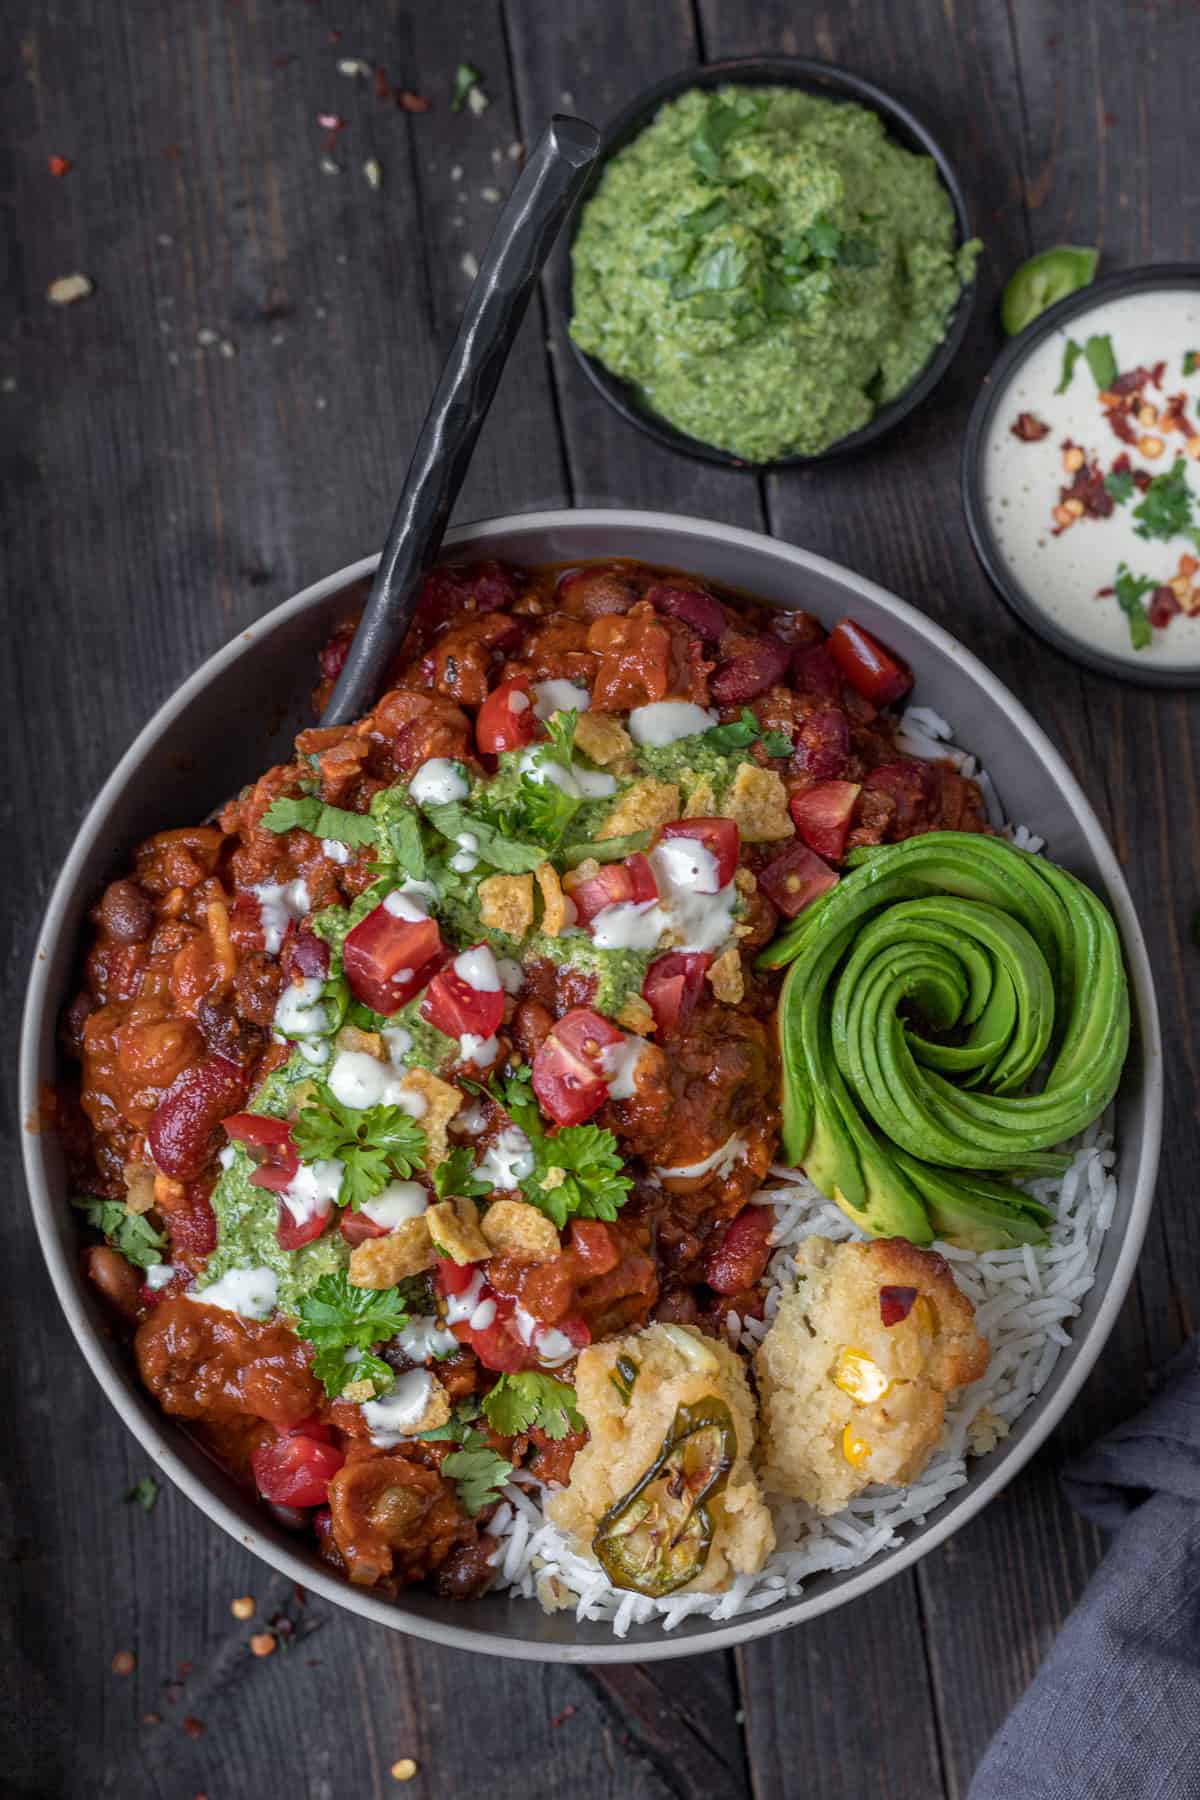 Bowl of best vegan chili served on rice with corn bread and avocado rose.